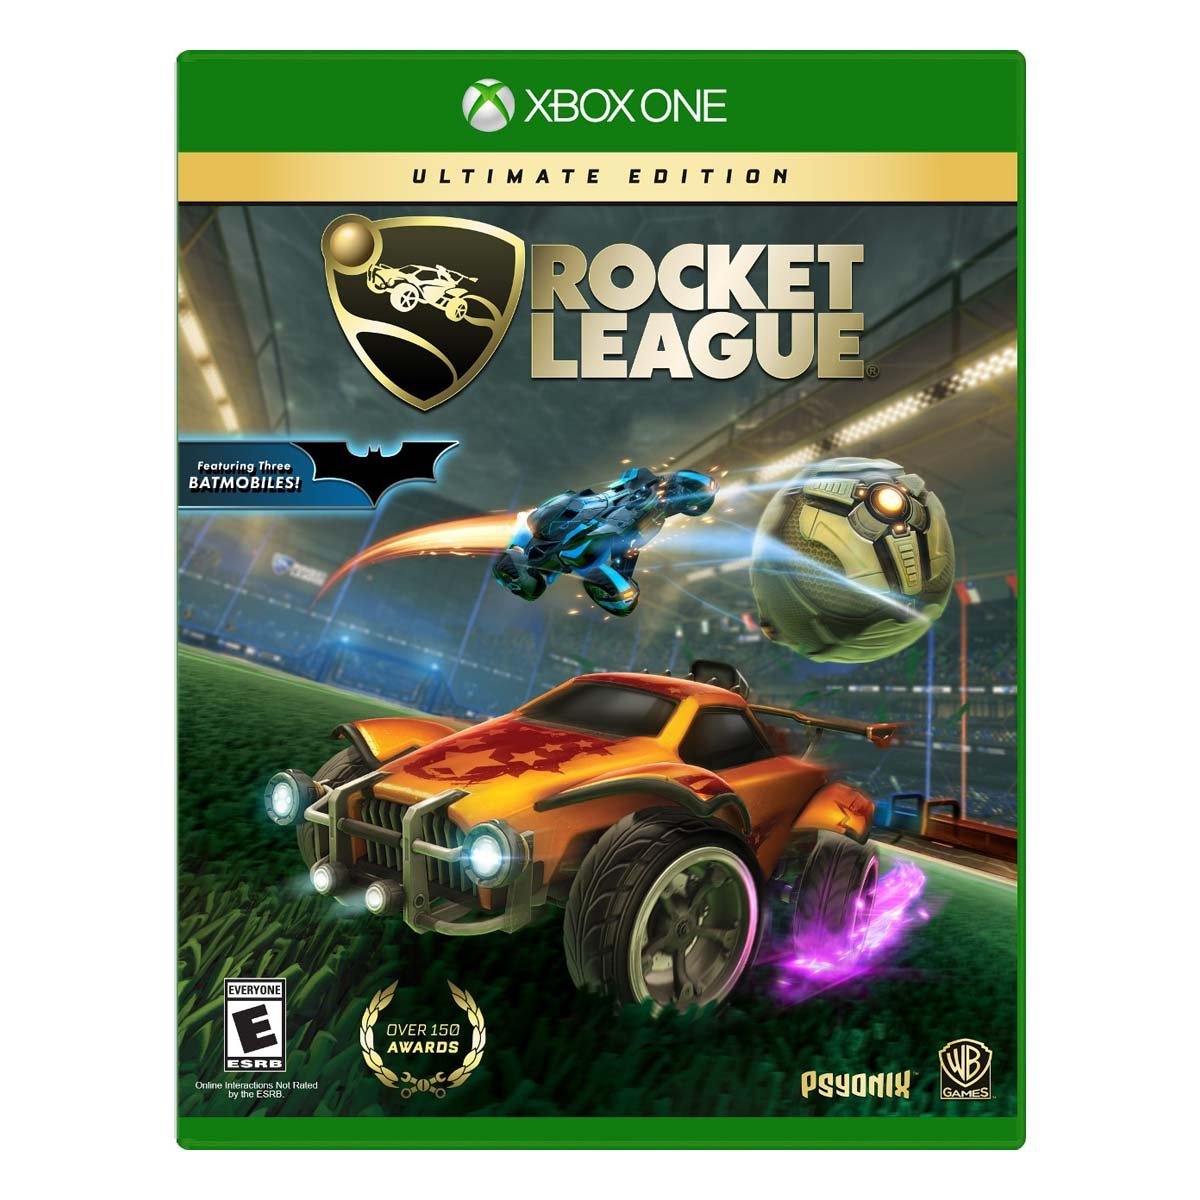 Xbox One Rocket League Ultimate Edition